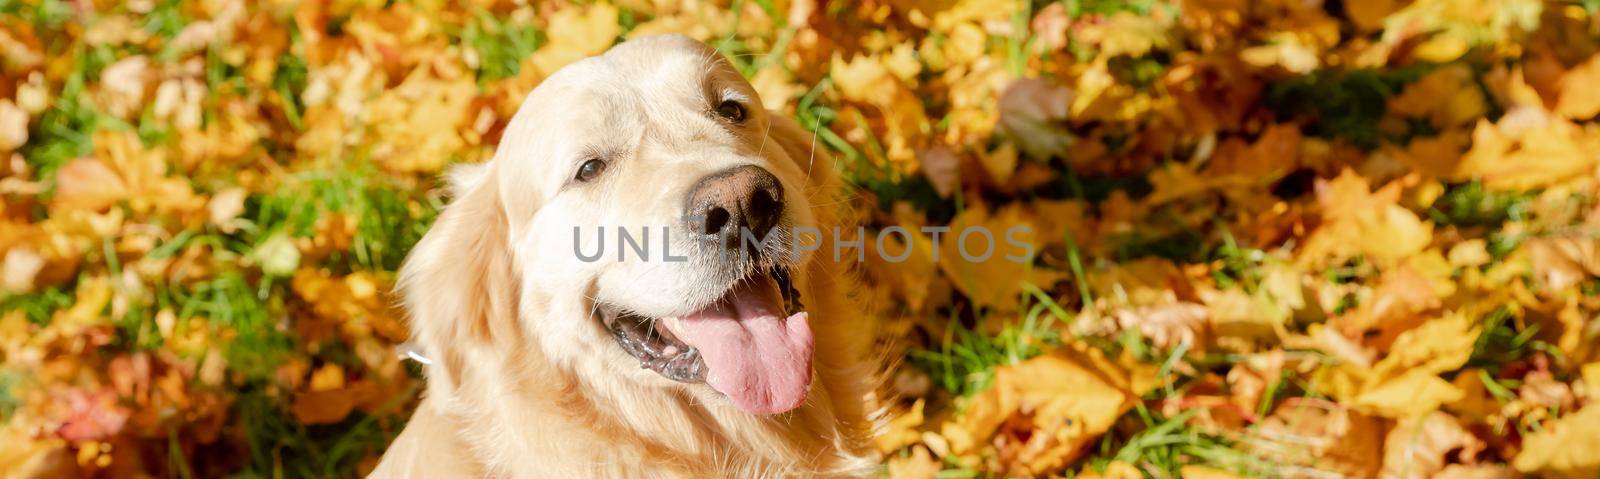 Young labrador retriever dog in the fallen yellow maple leaves in autumn park by YuliaYaspe1979